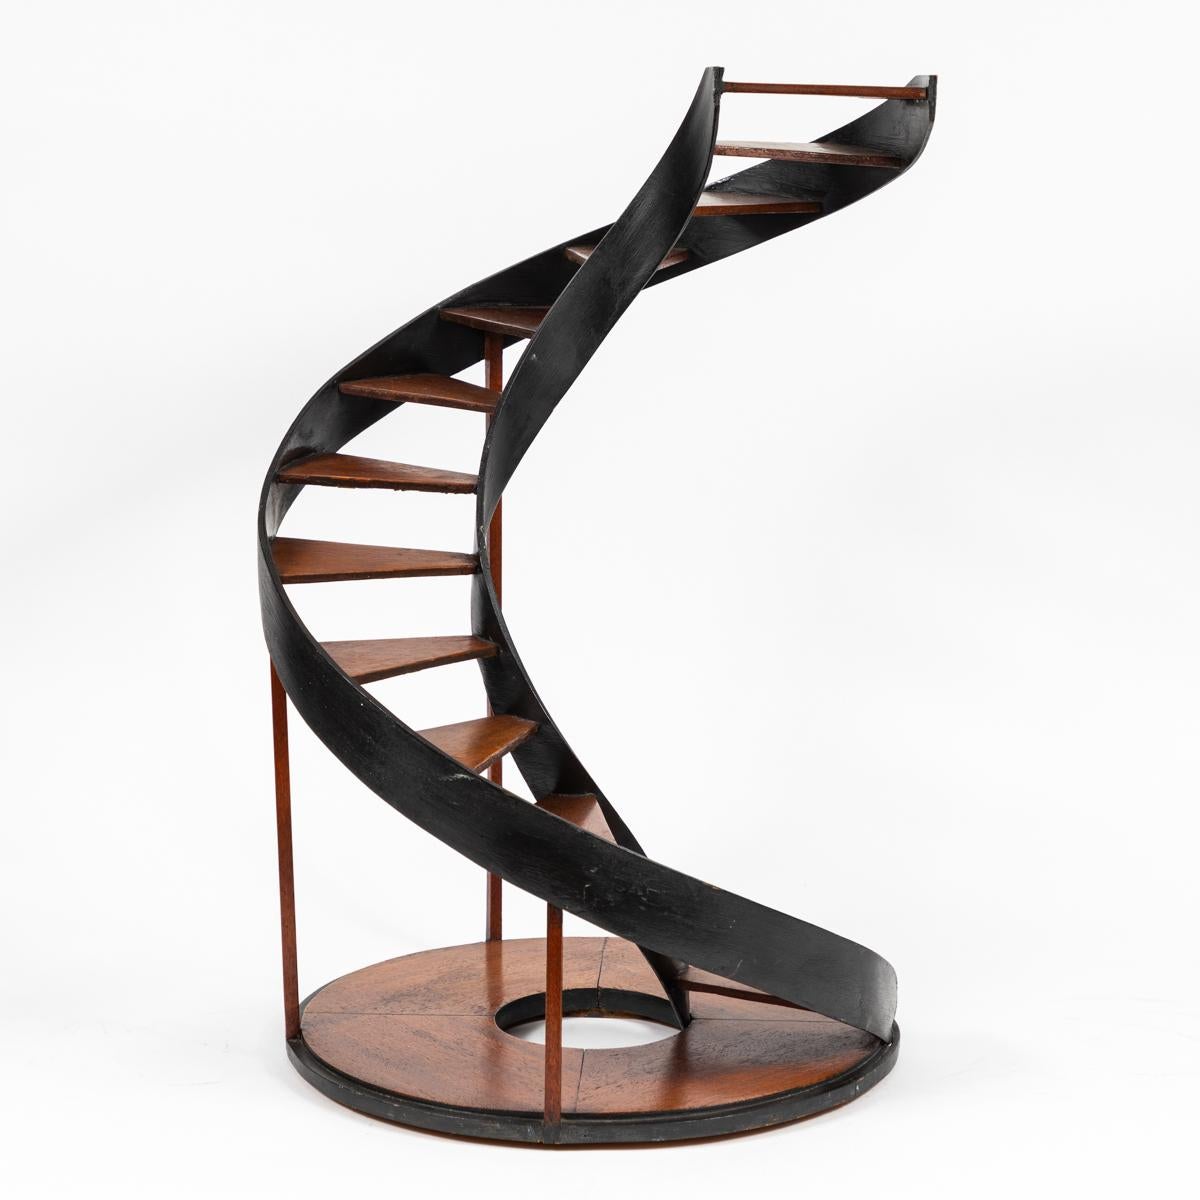 Late 19th-century industrial model of spiral staircase. Both understated and a conversation piece, the steps and circular base are a warm, honey-toned wood that complements the dark metal rails. Charged with movement and industrial grace.

France,